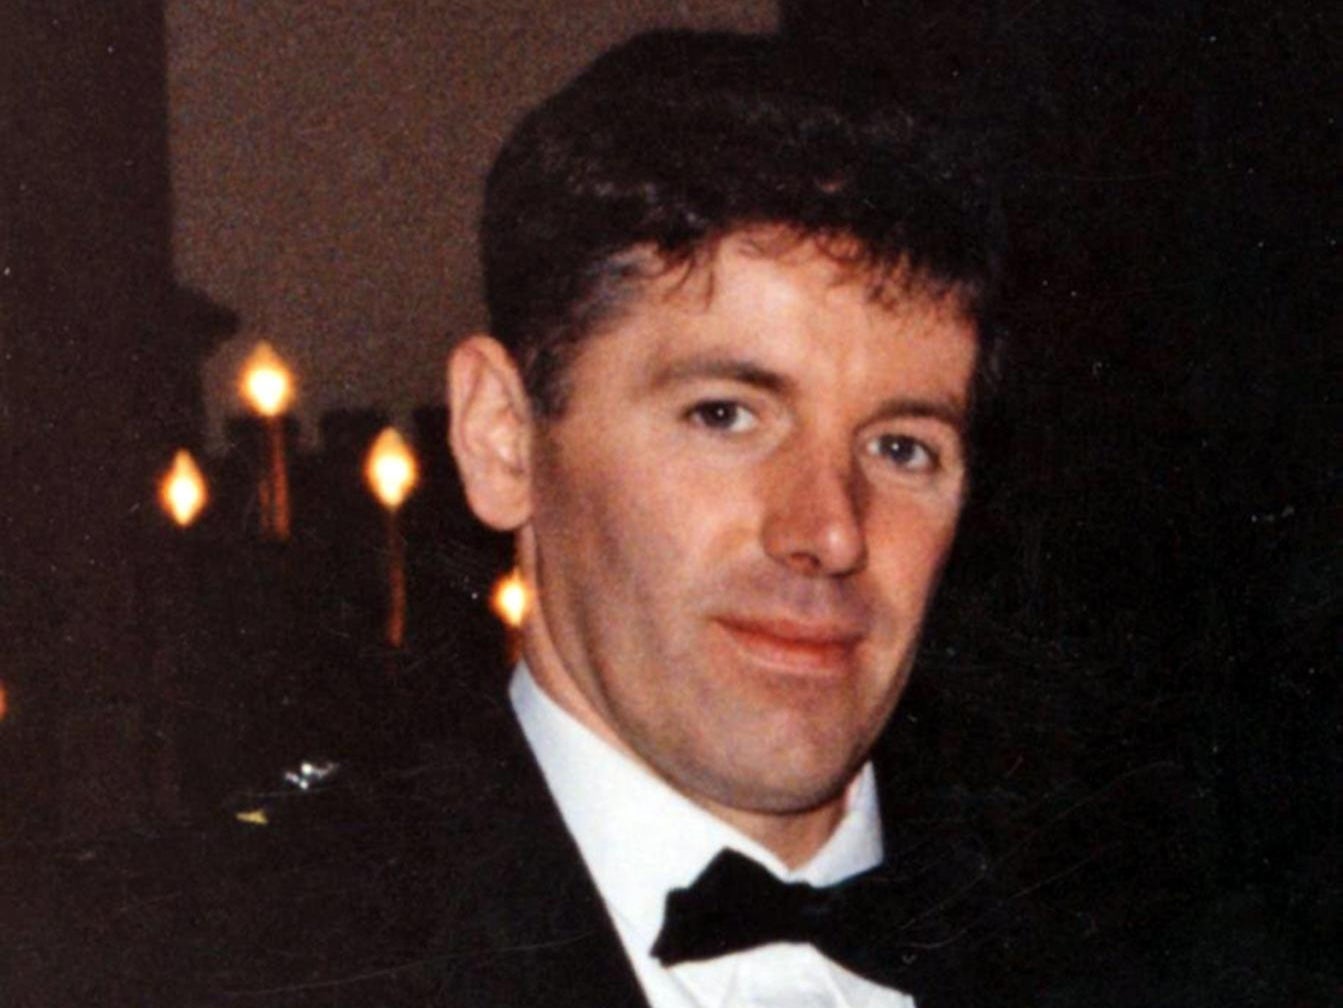 The brother of murdered car salesman Alexander Blue, 41, has called for police to reopen their probe on the 20th anniversary of his death